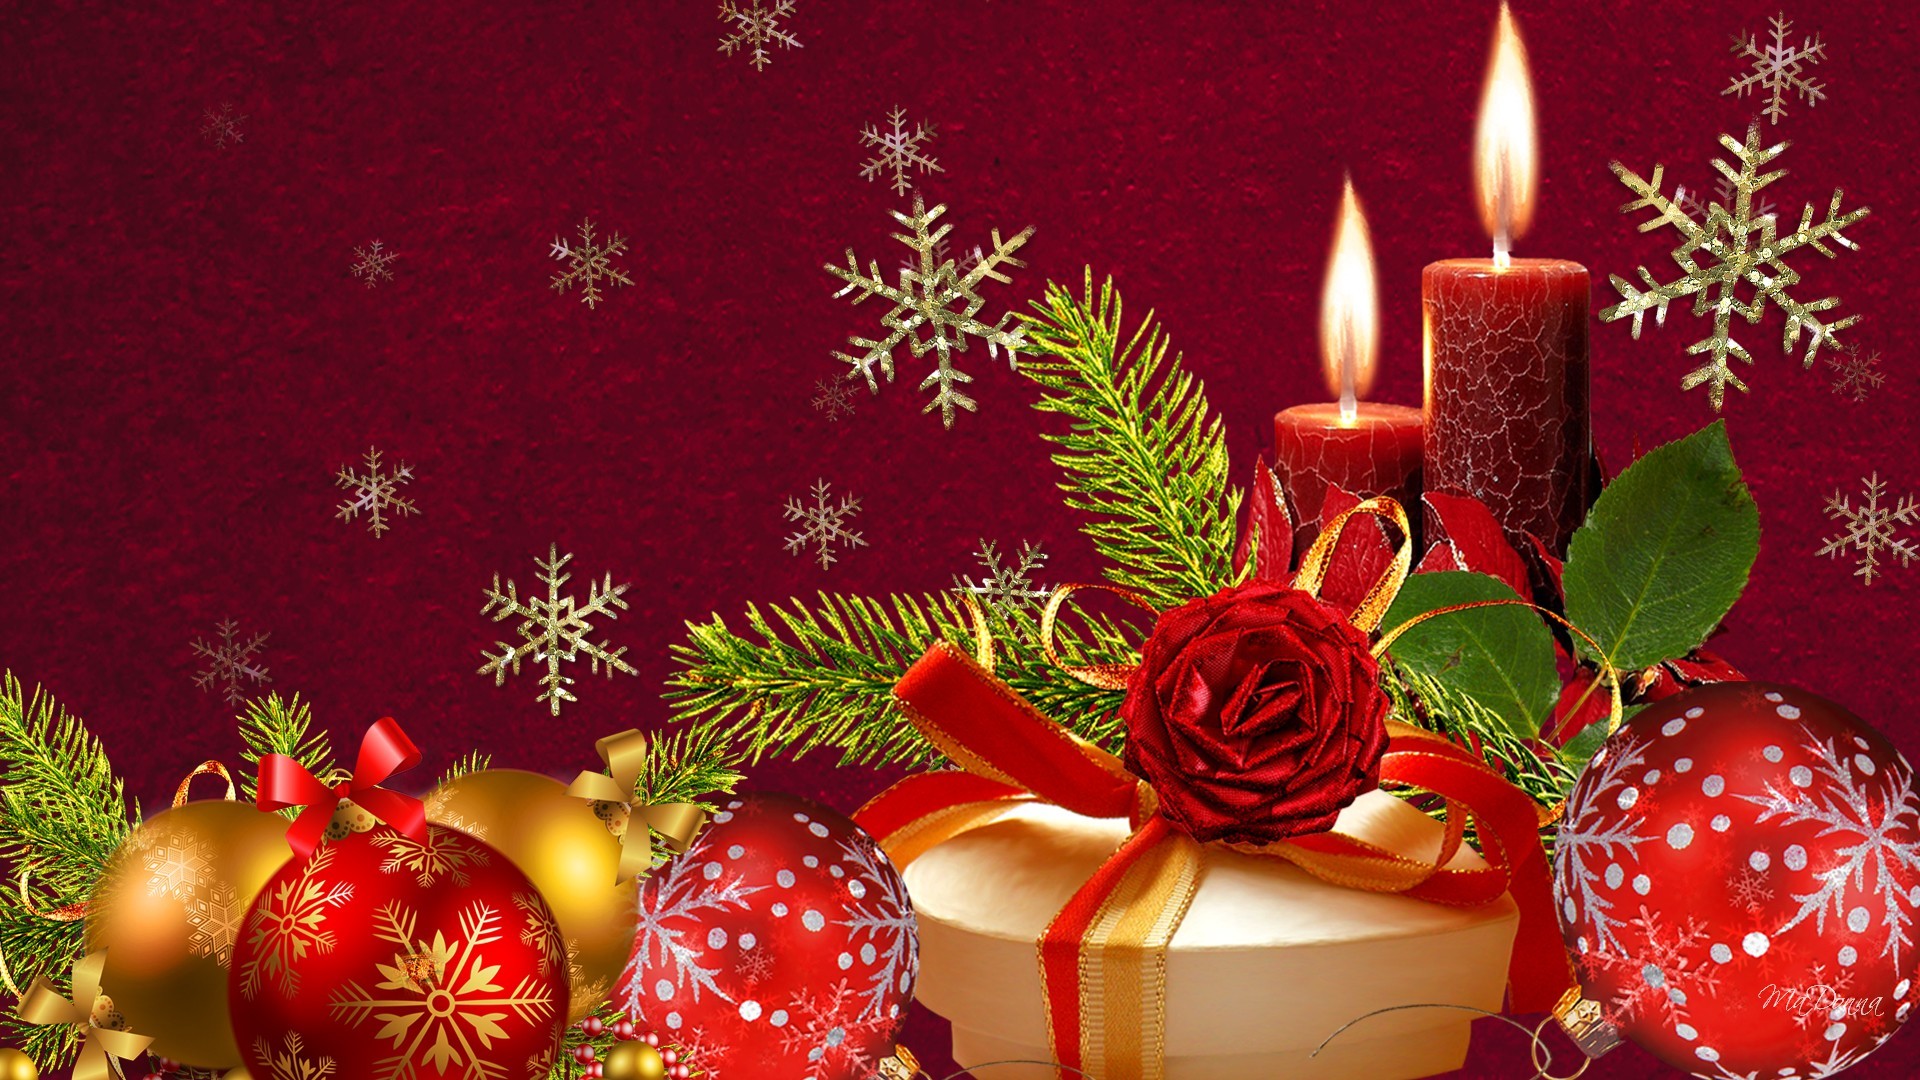 1920x1080 Red and Green Christmas Backgrounds Wallpapers Pictures Pics 